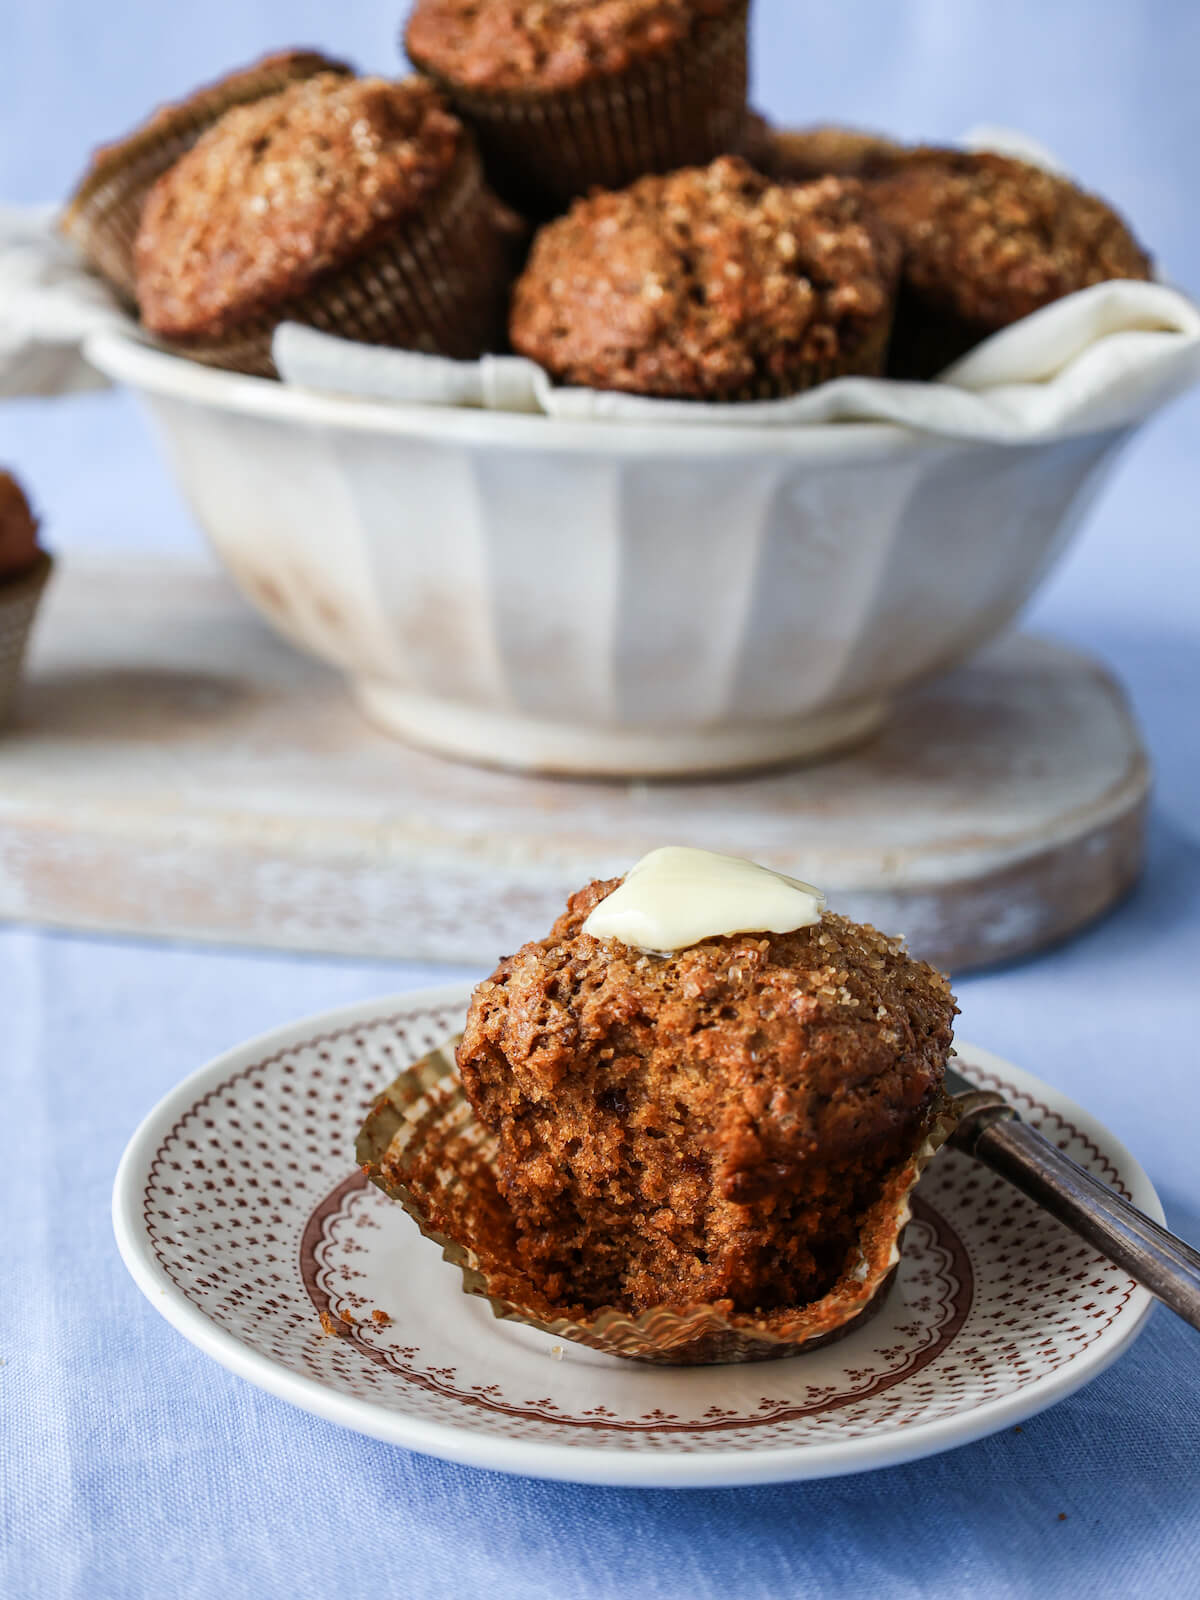 Bran muffin sitting on a plate in front of a bowl of muffins.